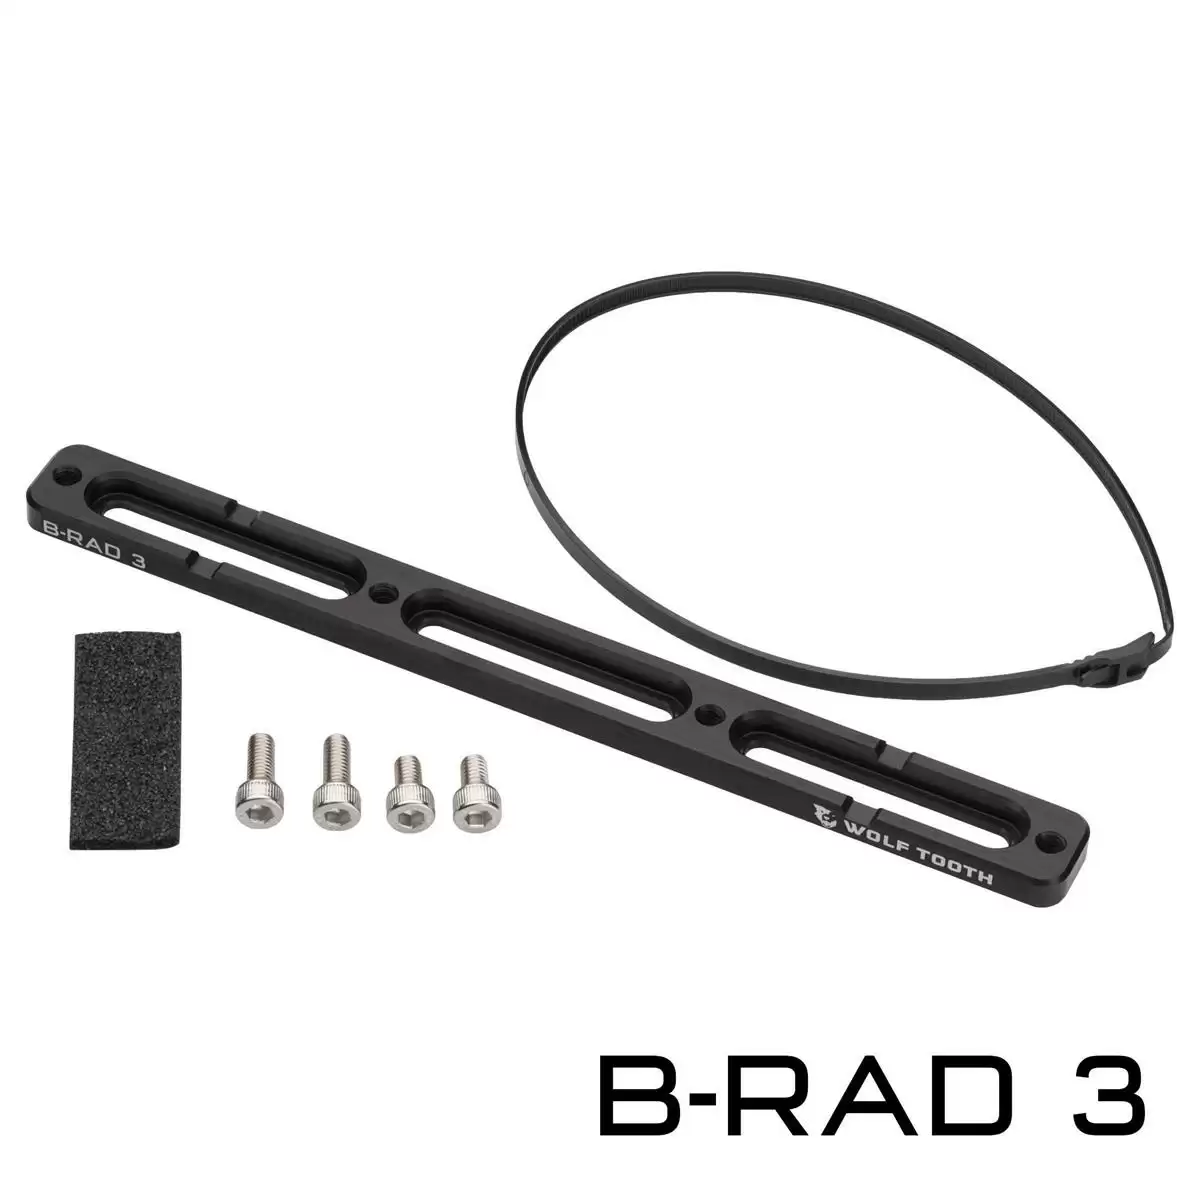 B-Rad 3 mounting base for straps and bags - image